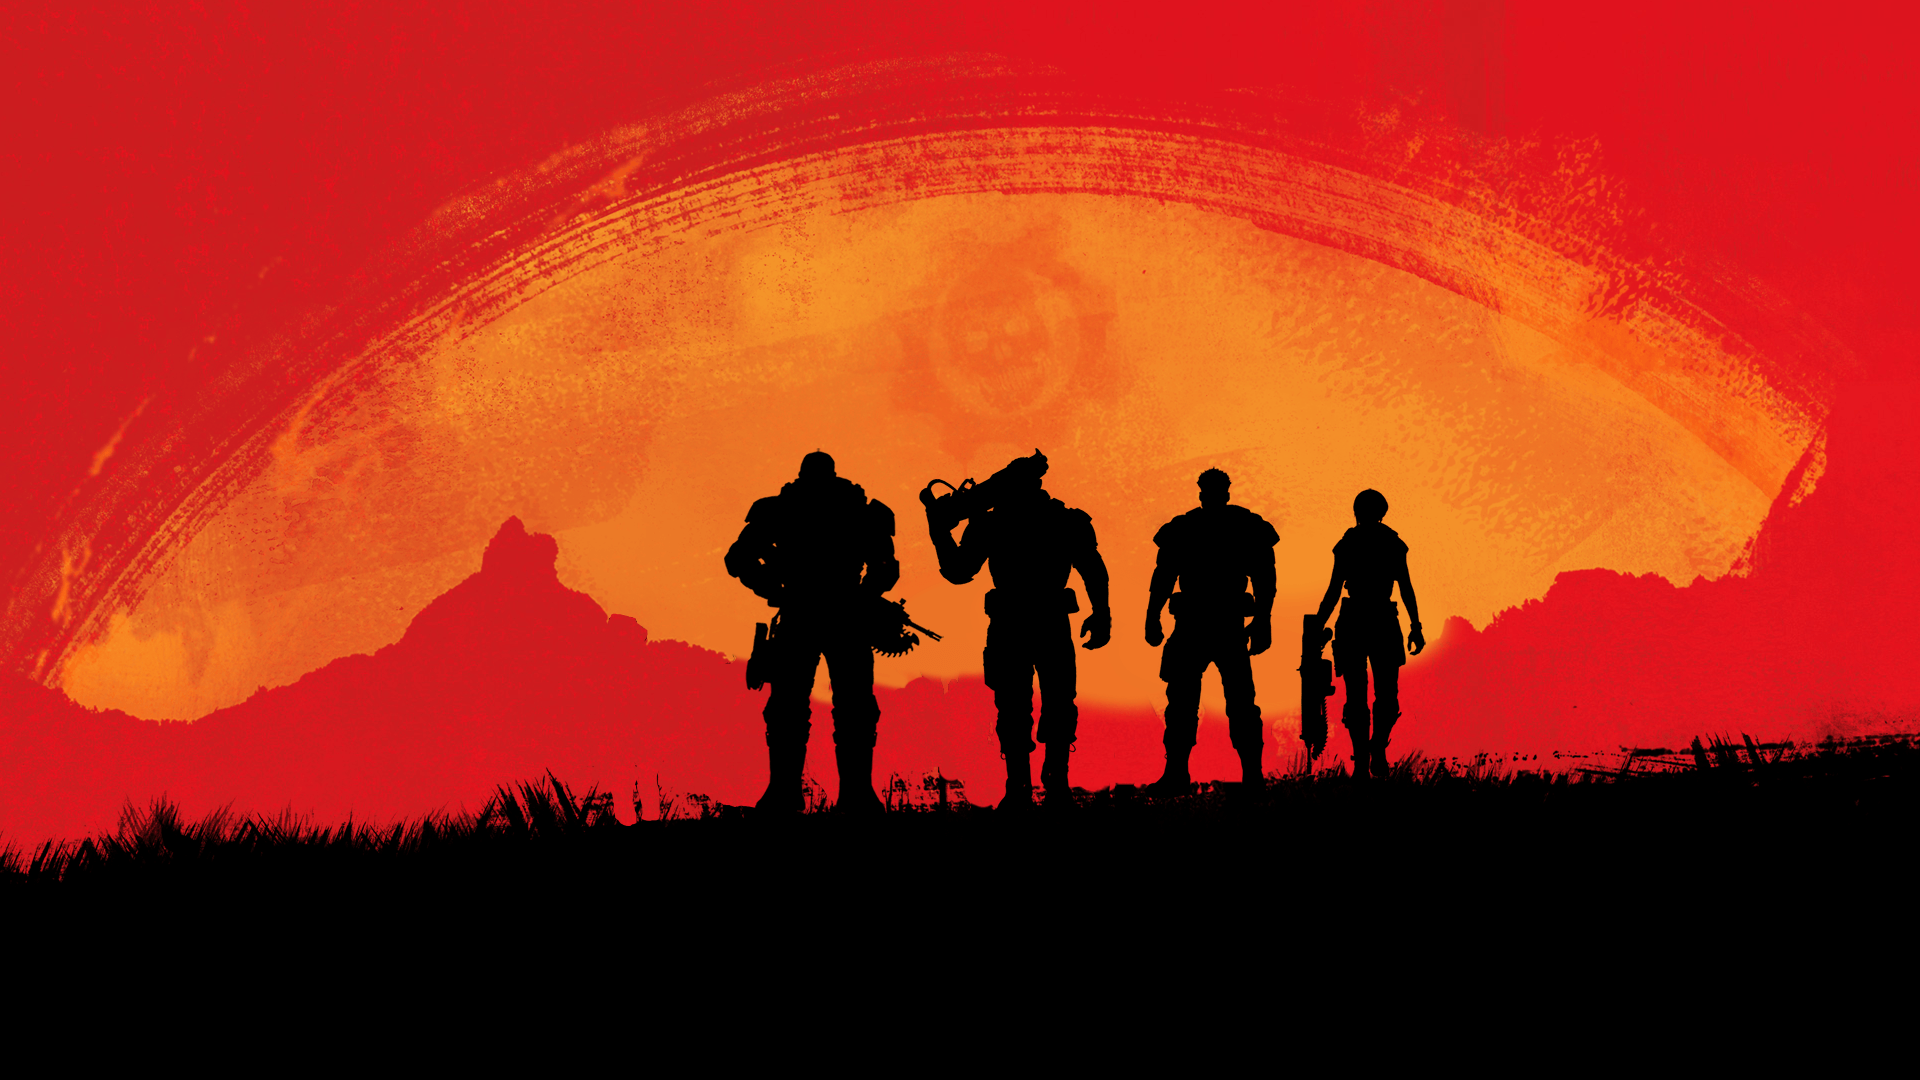 1920x1080 red dead redemption 2 image